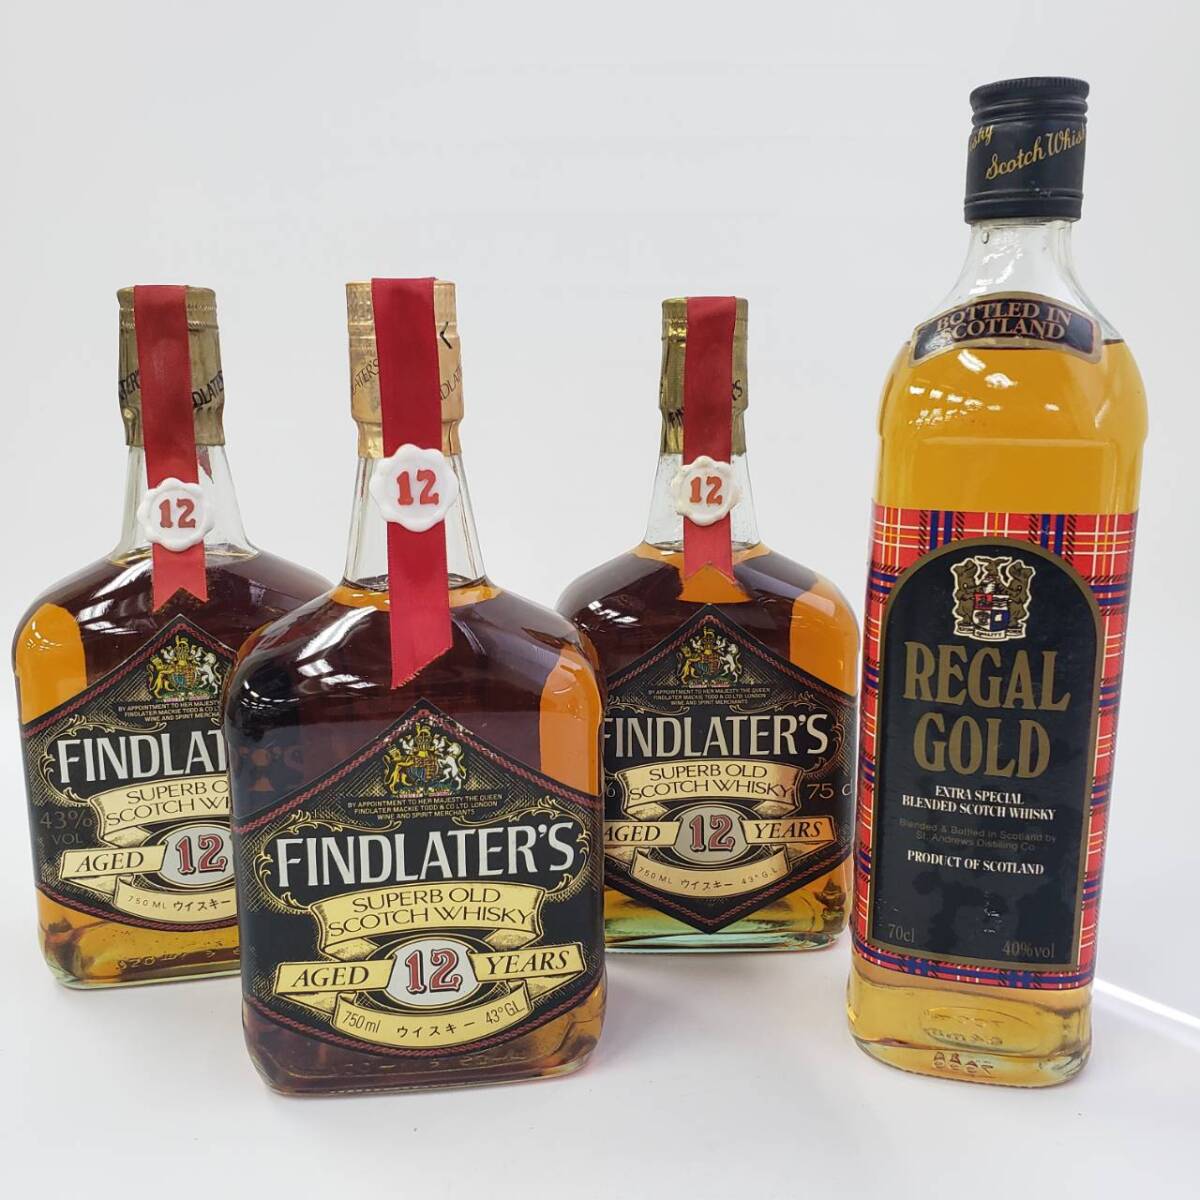 M15885(044)-565/OS5000 酒 ※同梱不可 ４本まとめ FINDLATER'S 12年 SUPERB OLD SCOTCH WHISKY/REGAL GOLD EXTRA SPECIAL ウイスキーの画像1